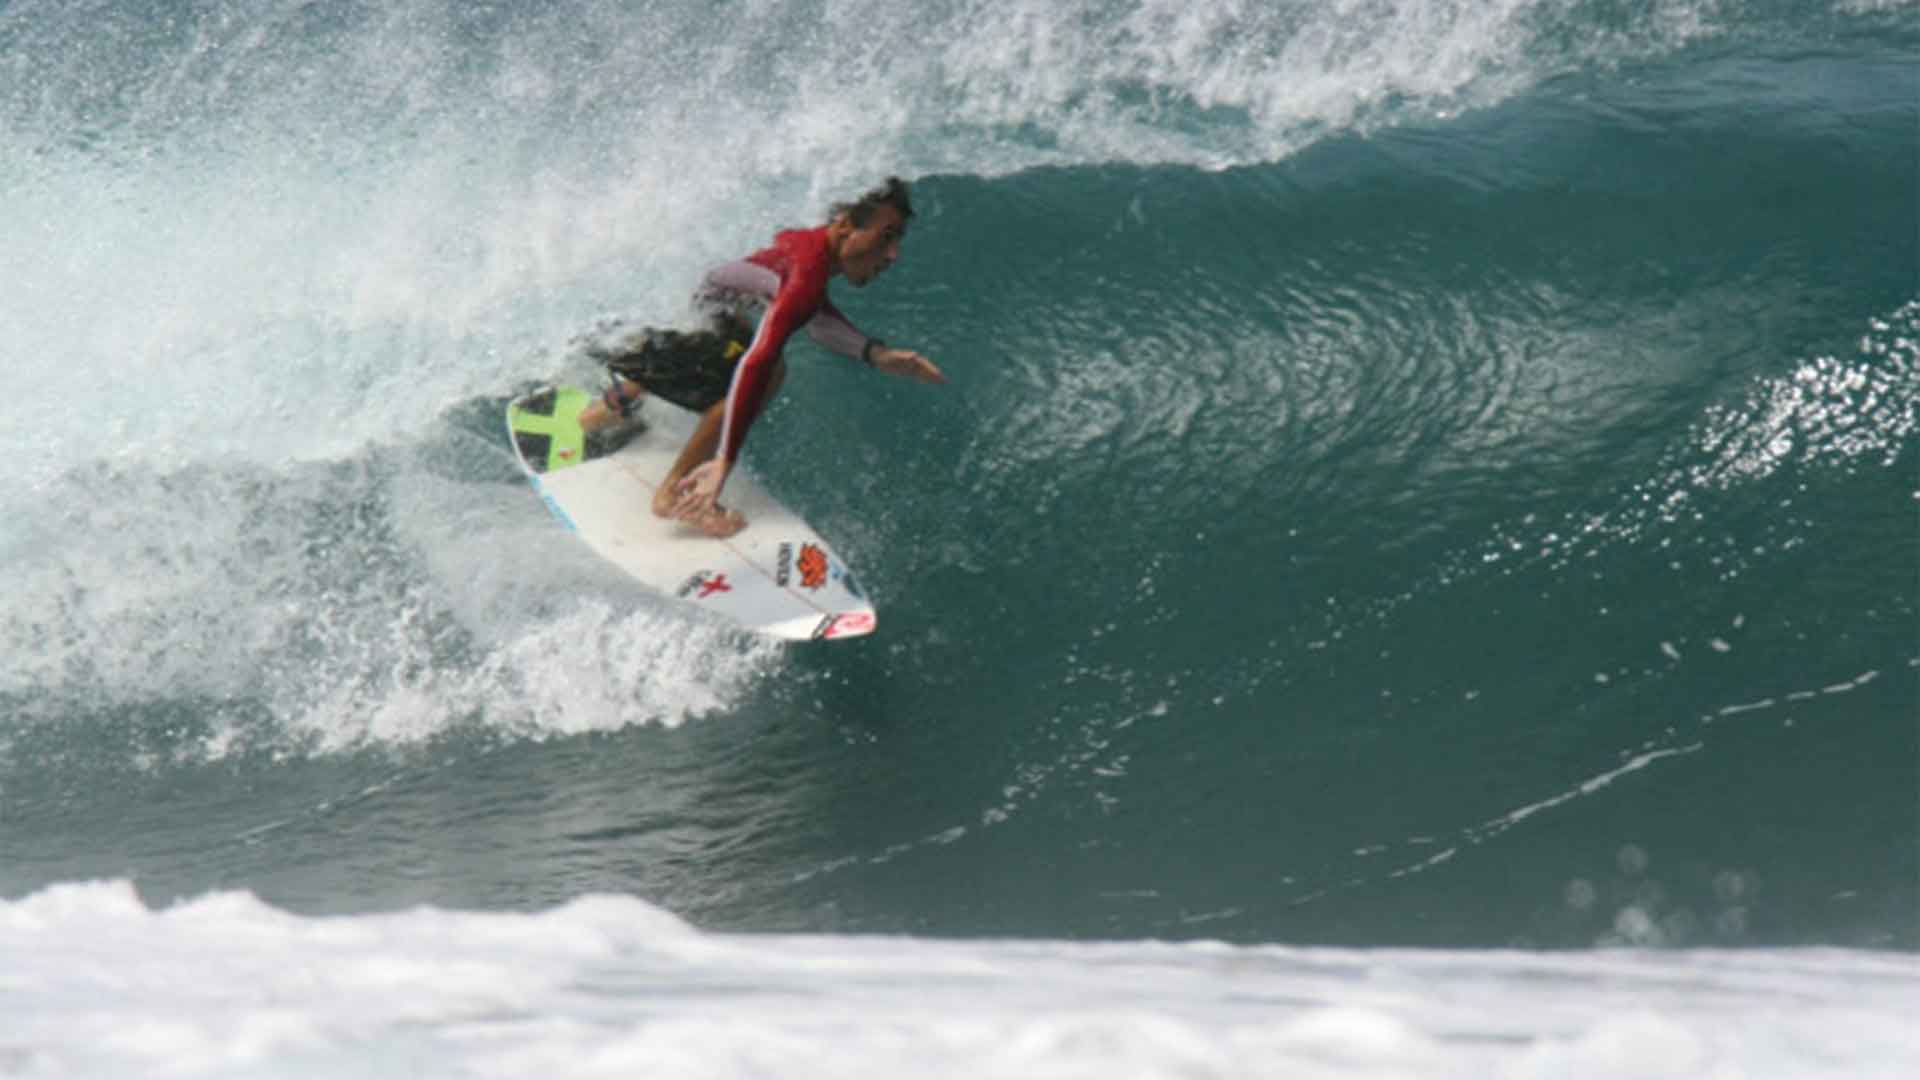 A surfer surfing n a tube wave at Playa Grande, Costa Rica